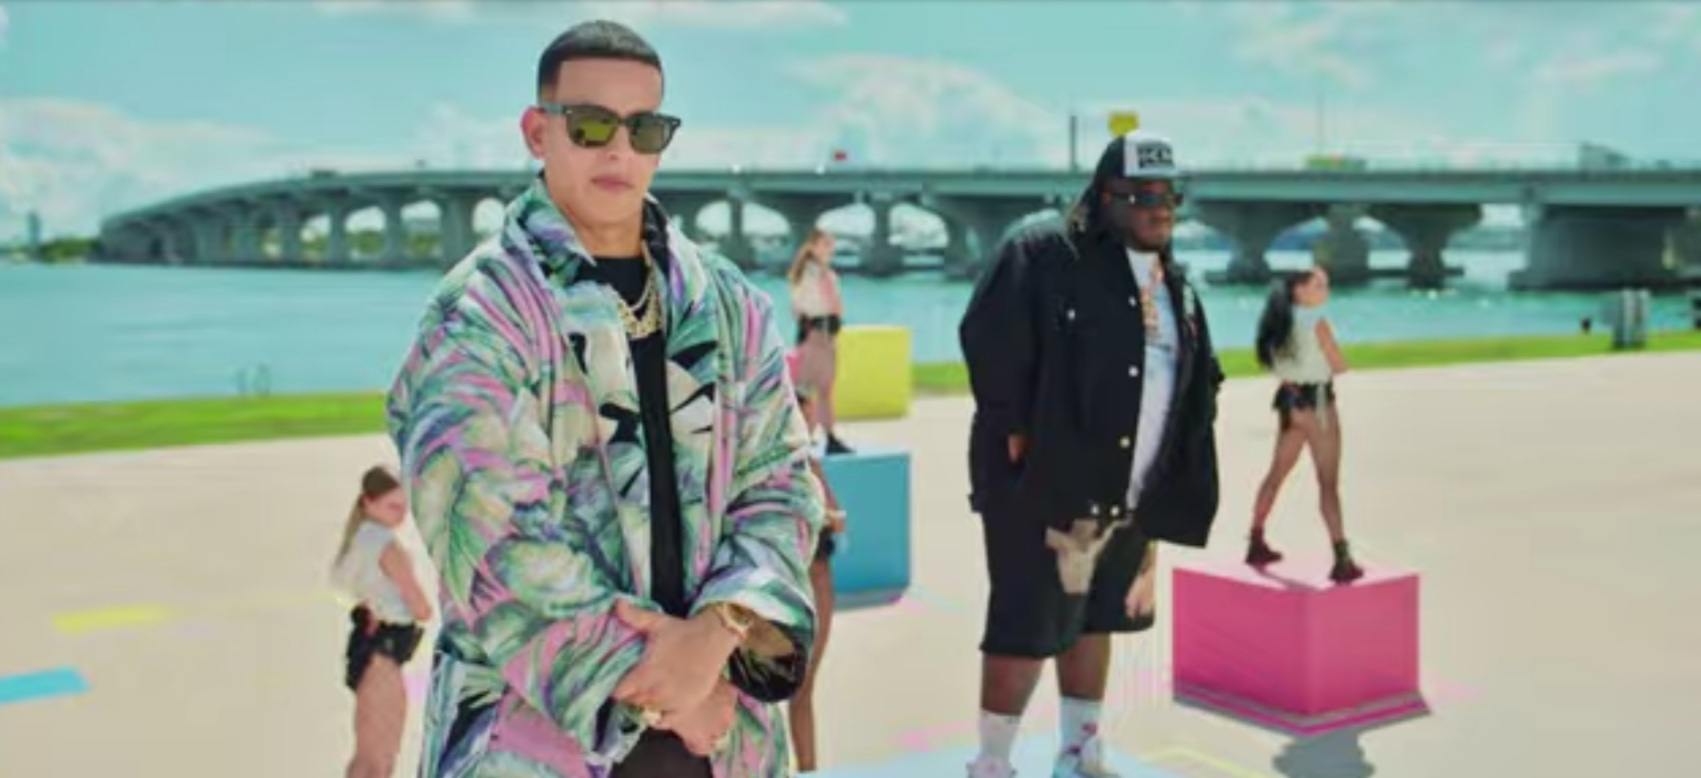 Sech, Daddy Yankee, J Balvin - Sal y Perrea Remix (Video Oficial)